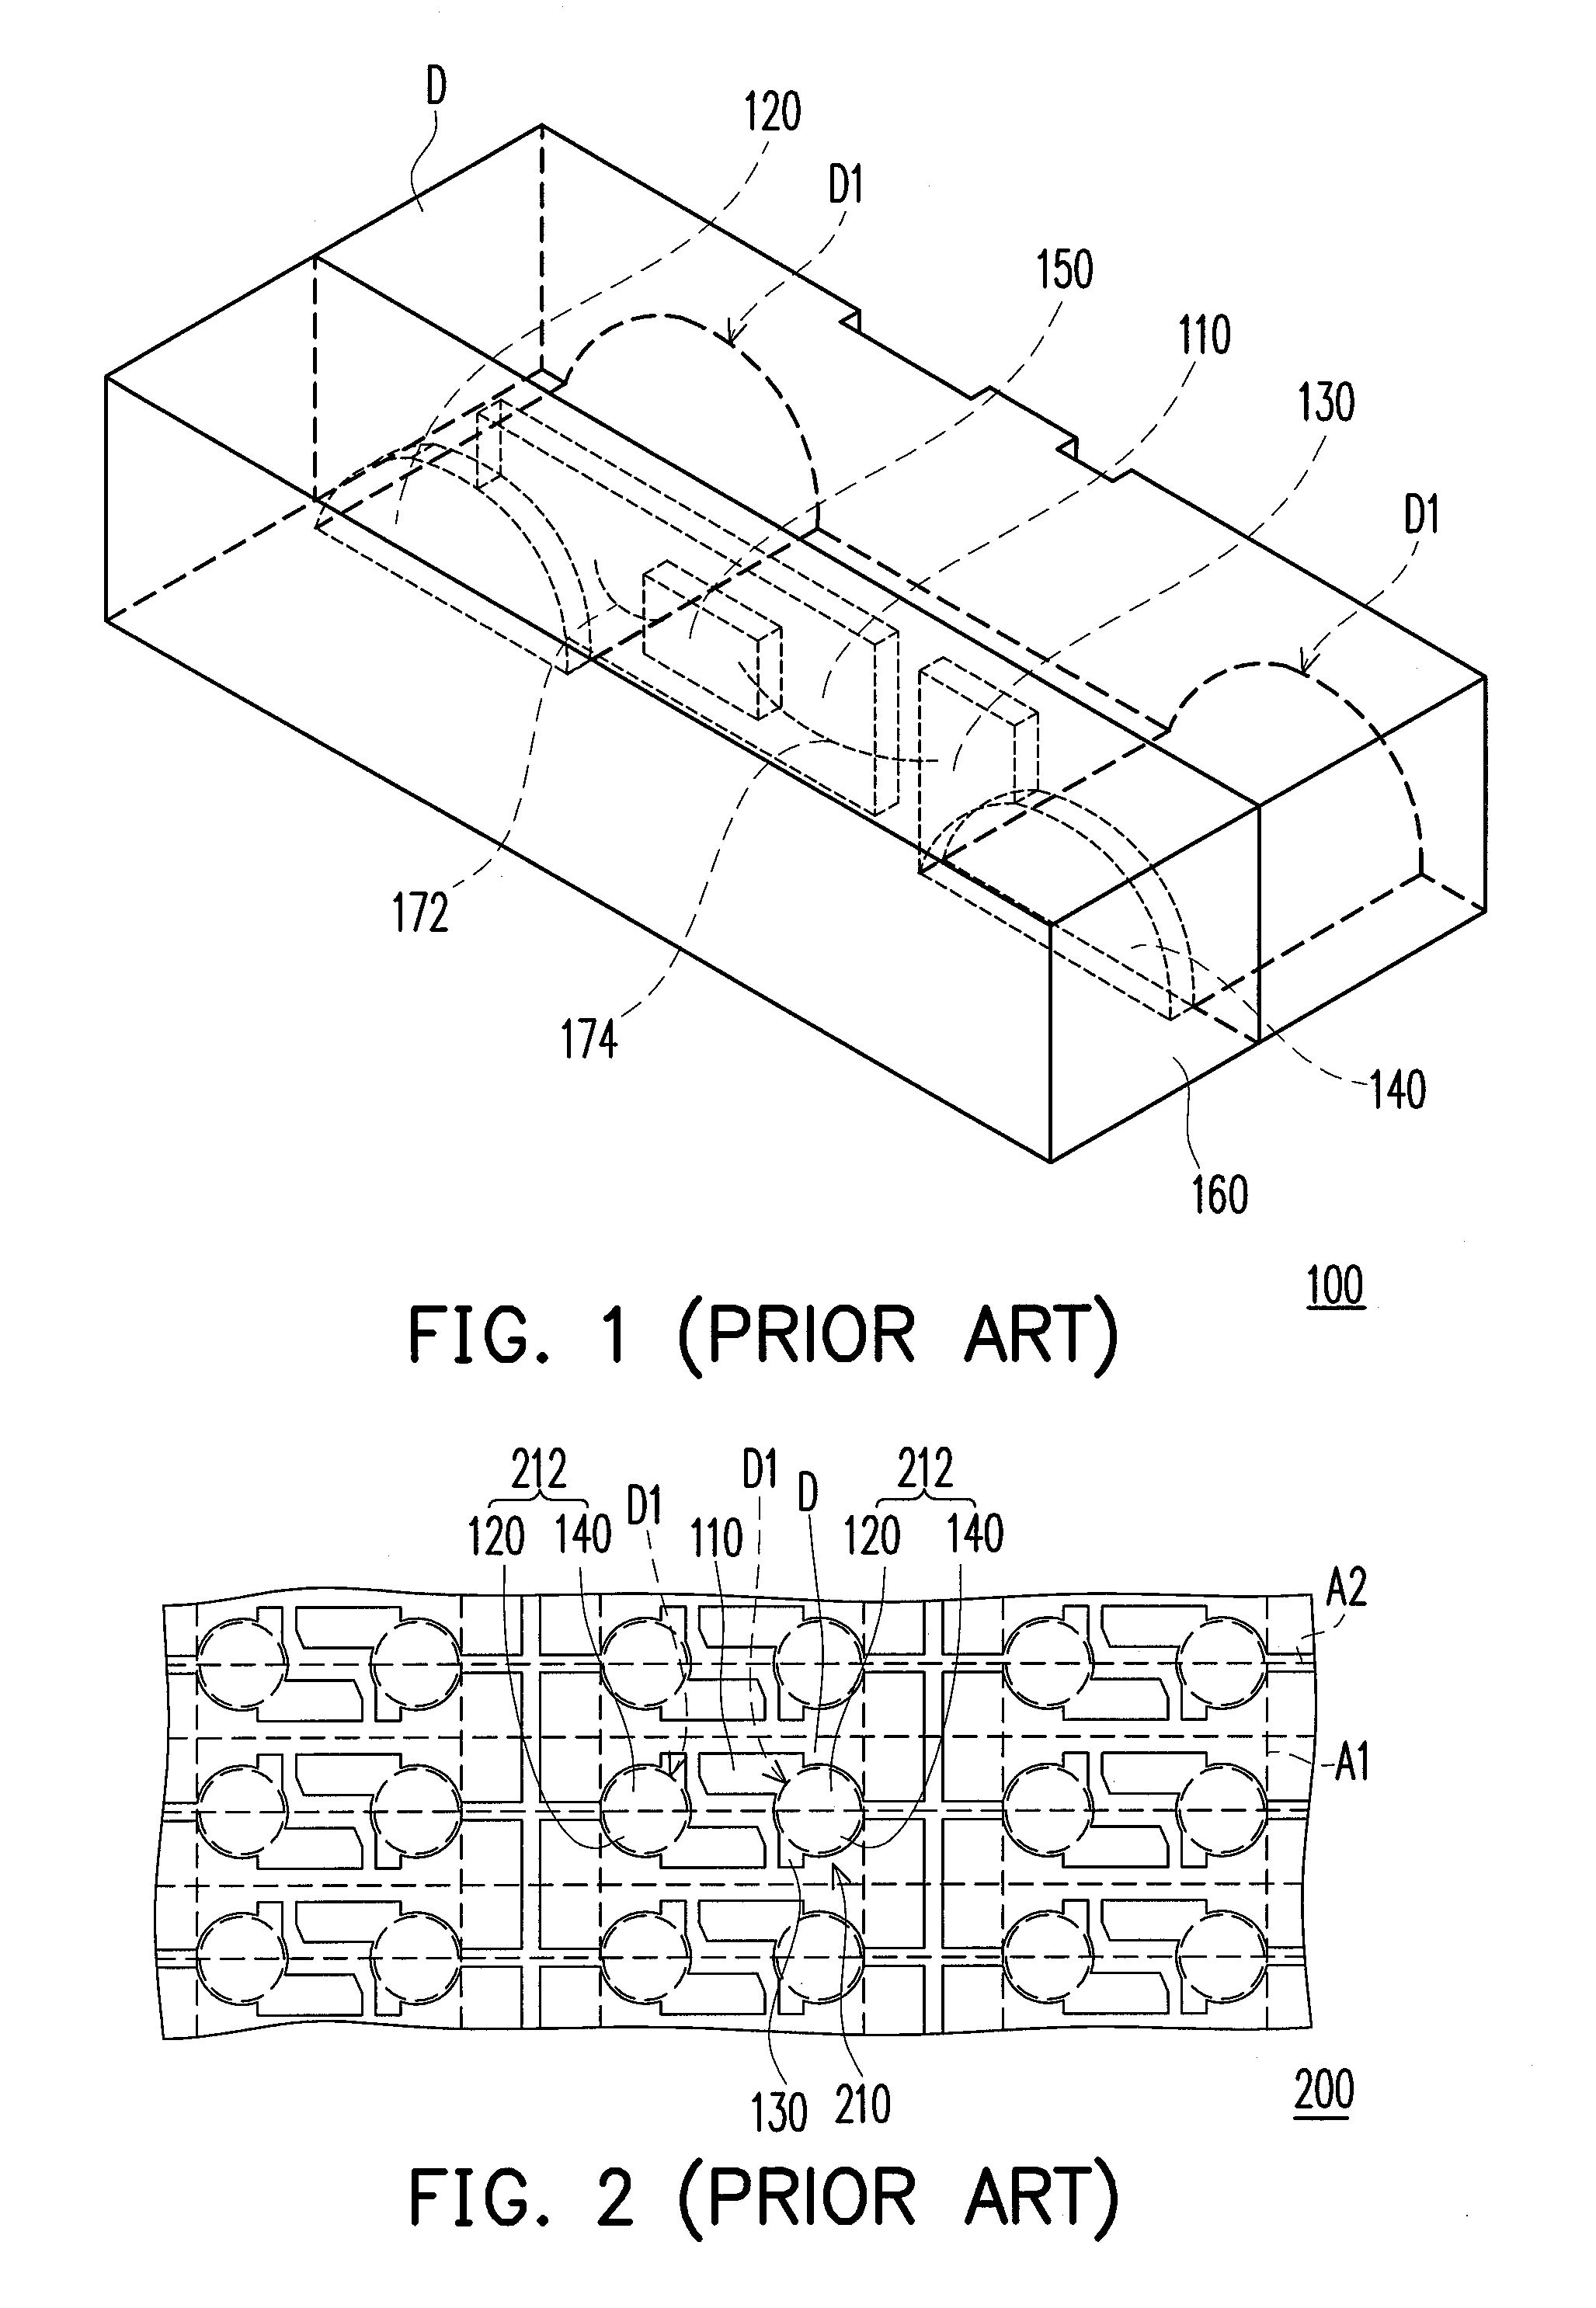 Circuit substrate and light emitting diode package